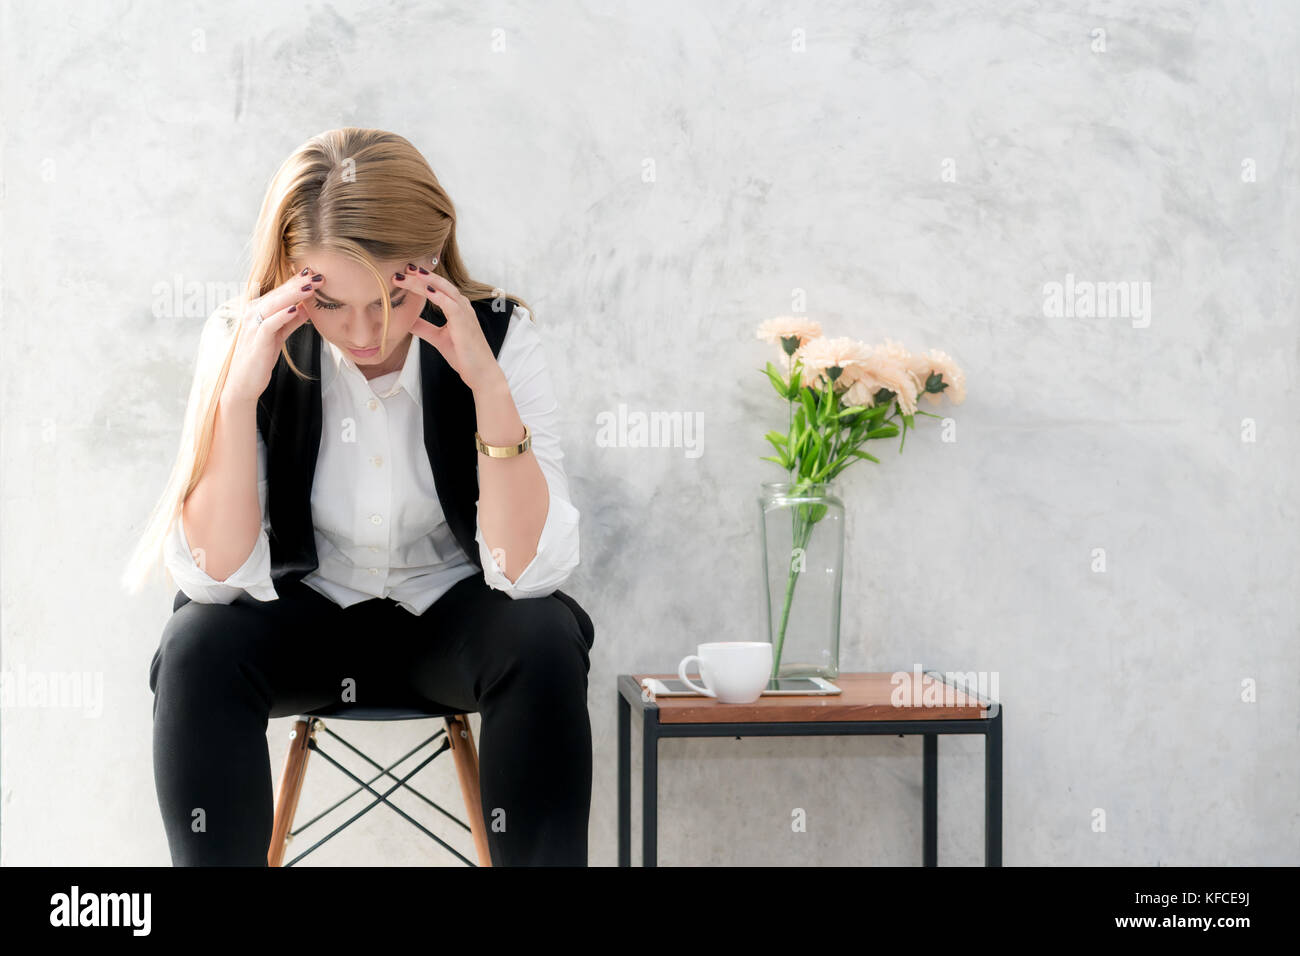 Portrait of tired young Asian business woman feeling stress from work. Stress at work and emotional pressure concept. Stock Photo